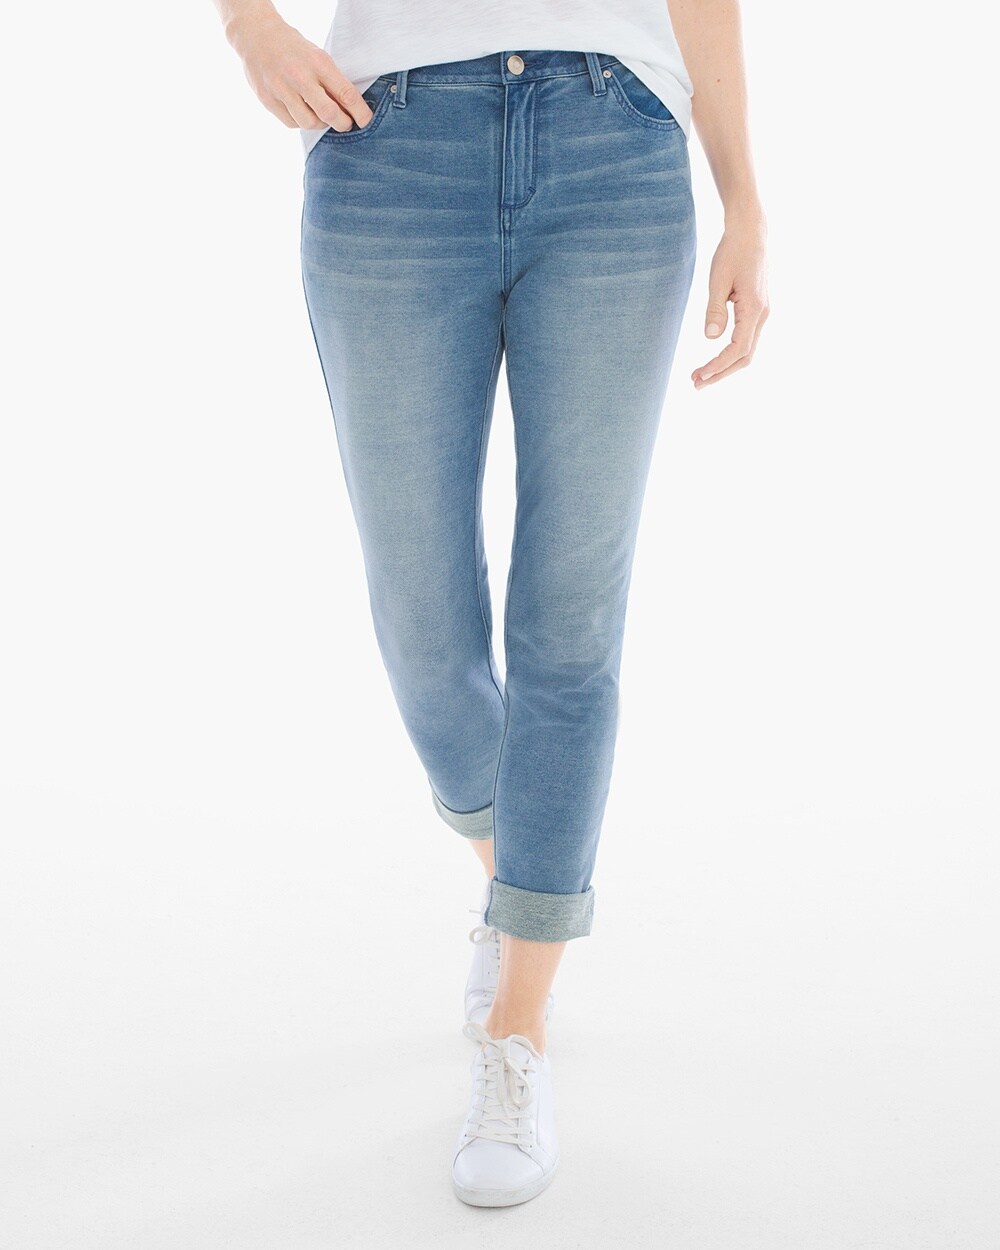 Zenergy French Terry Crop Jeans